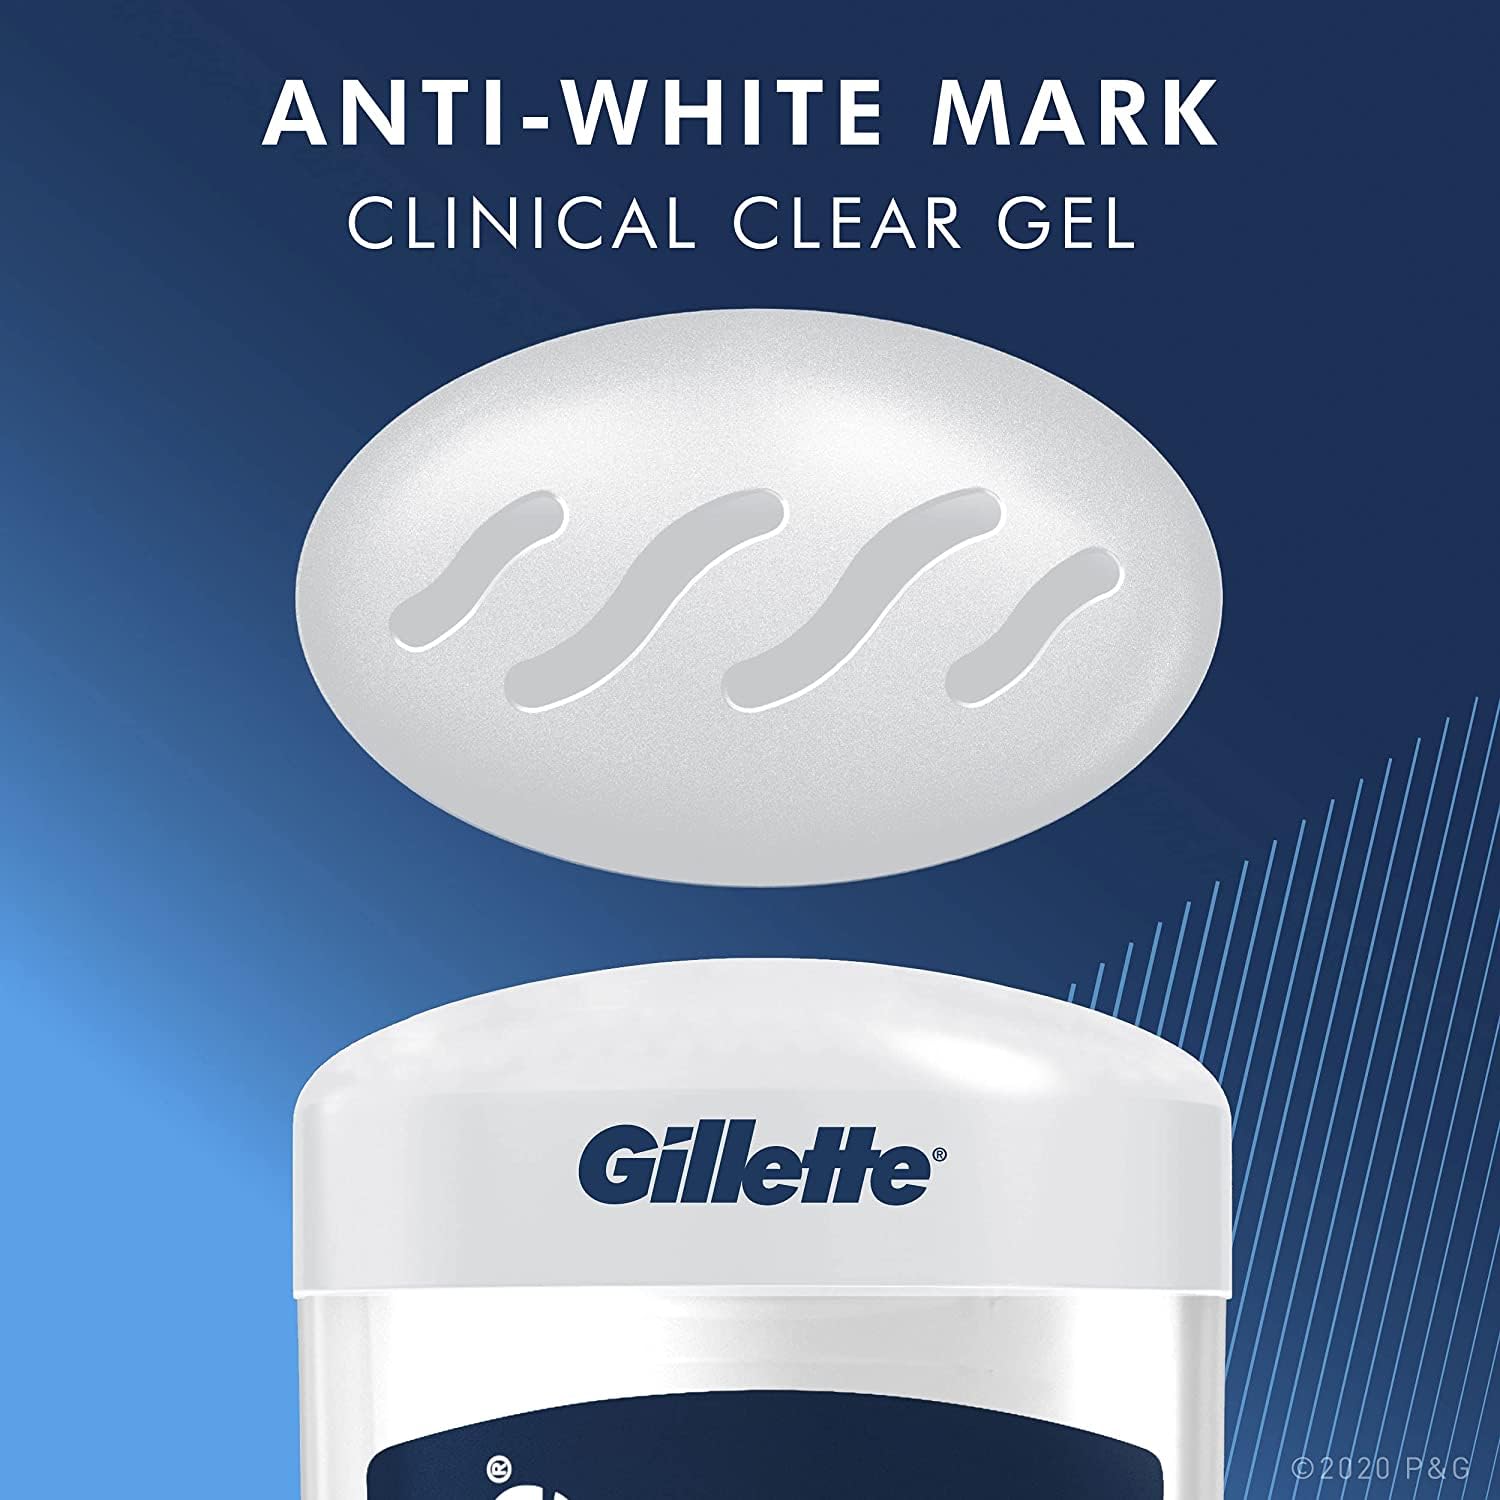 Gillette Clinical Clear Gel Cool Wave Antiperspirant and Deodorant 2.6 Oz Packaging May Vary